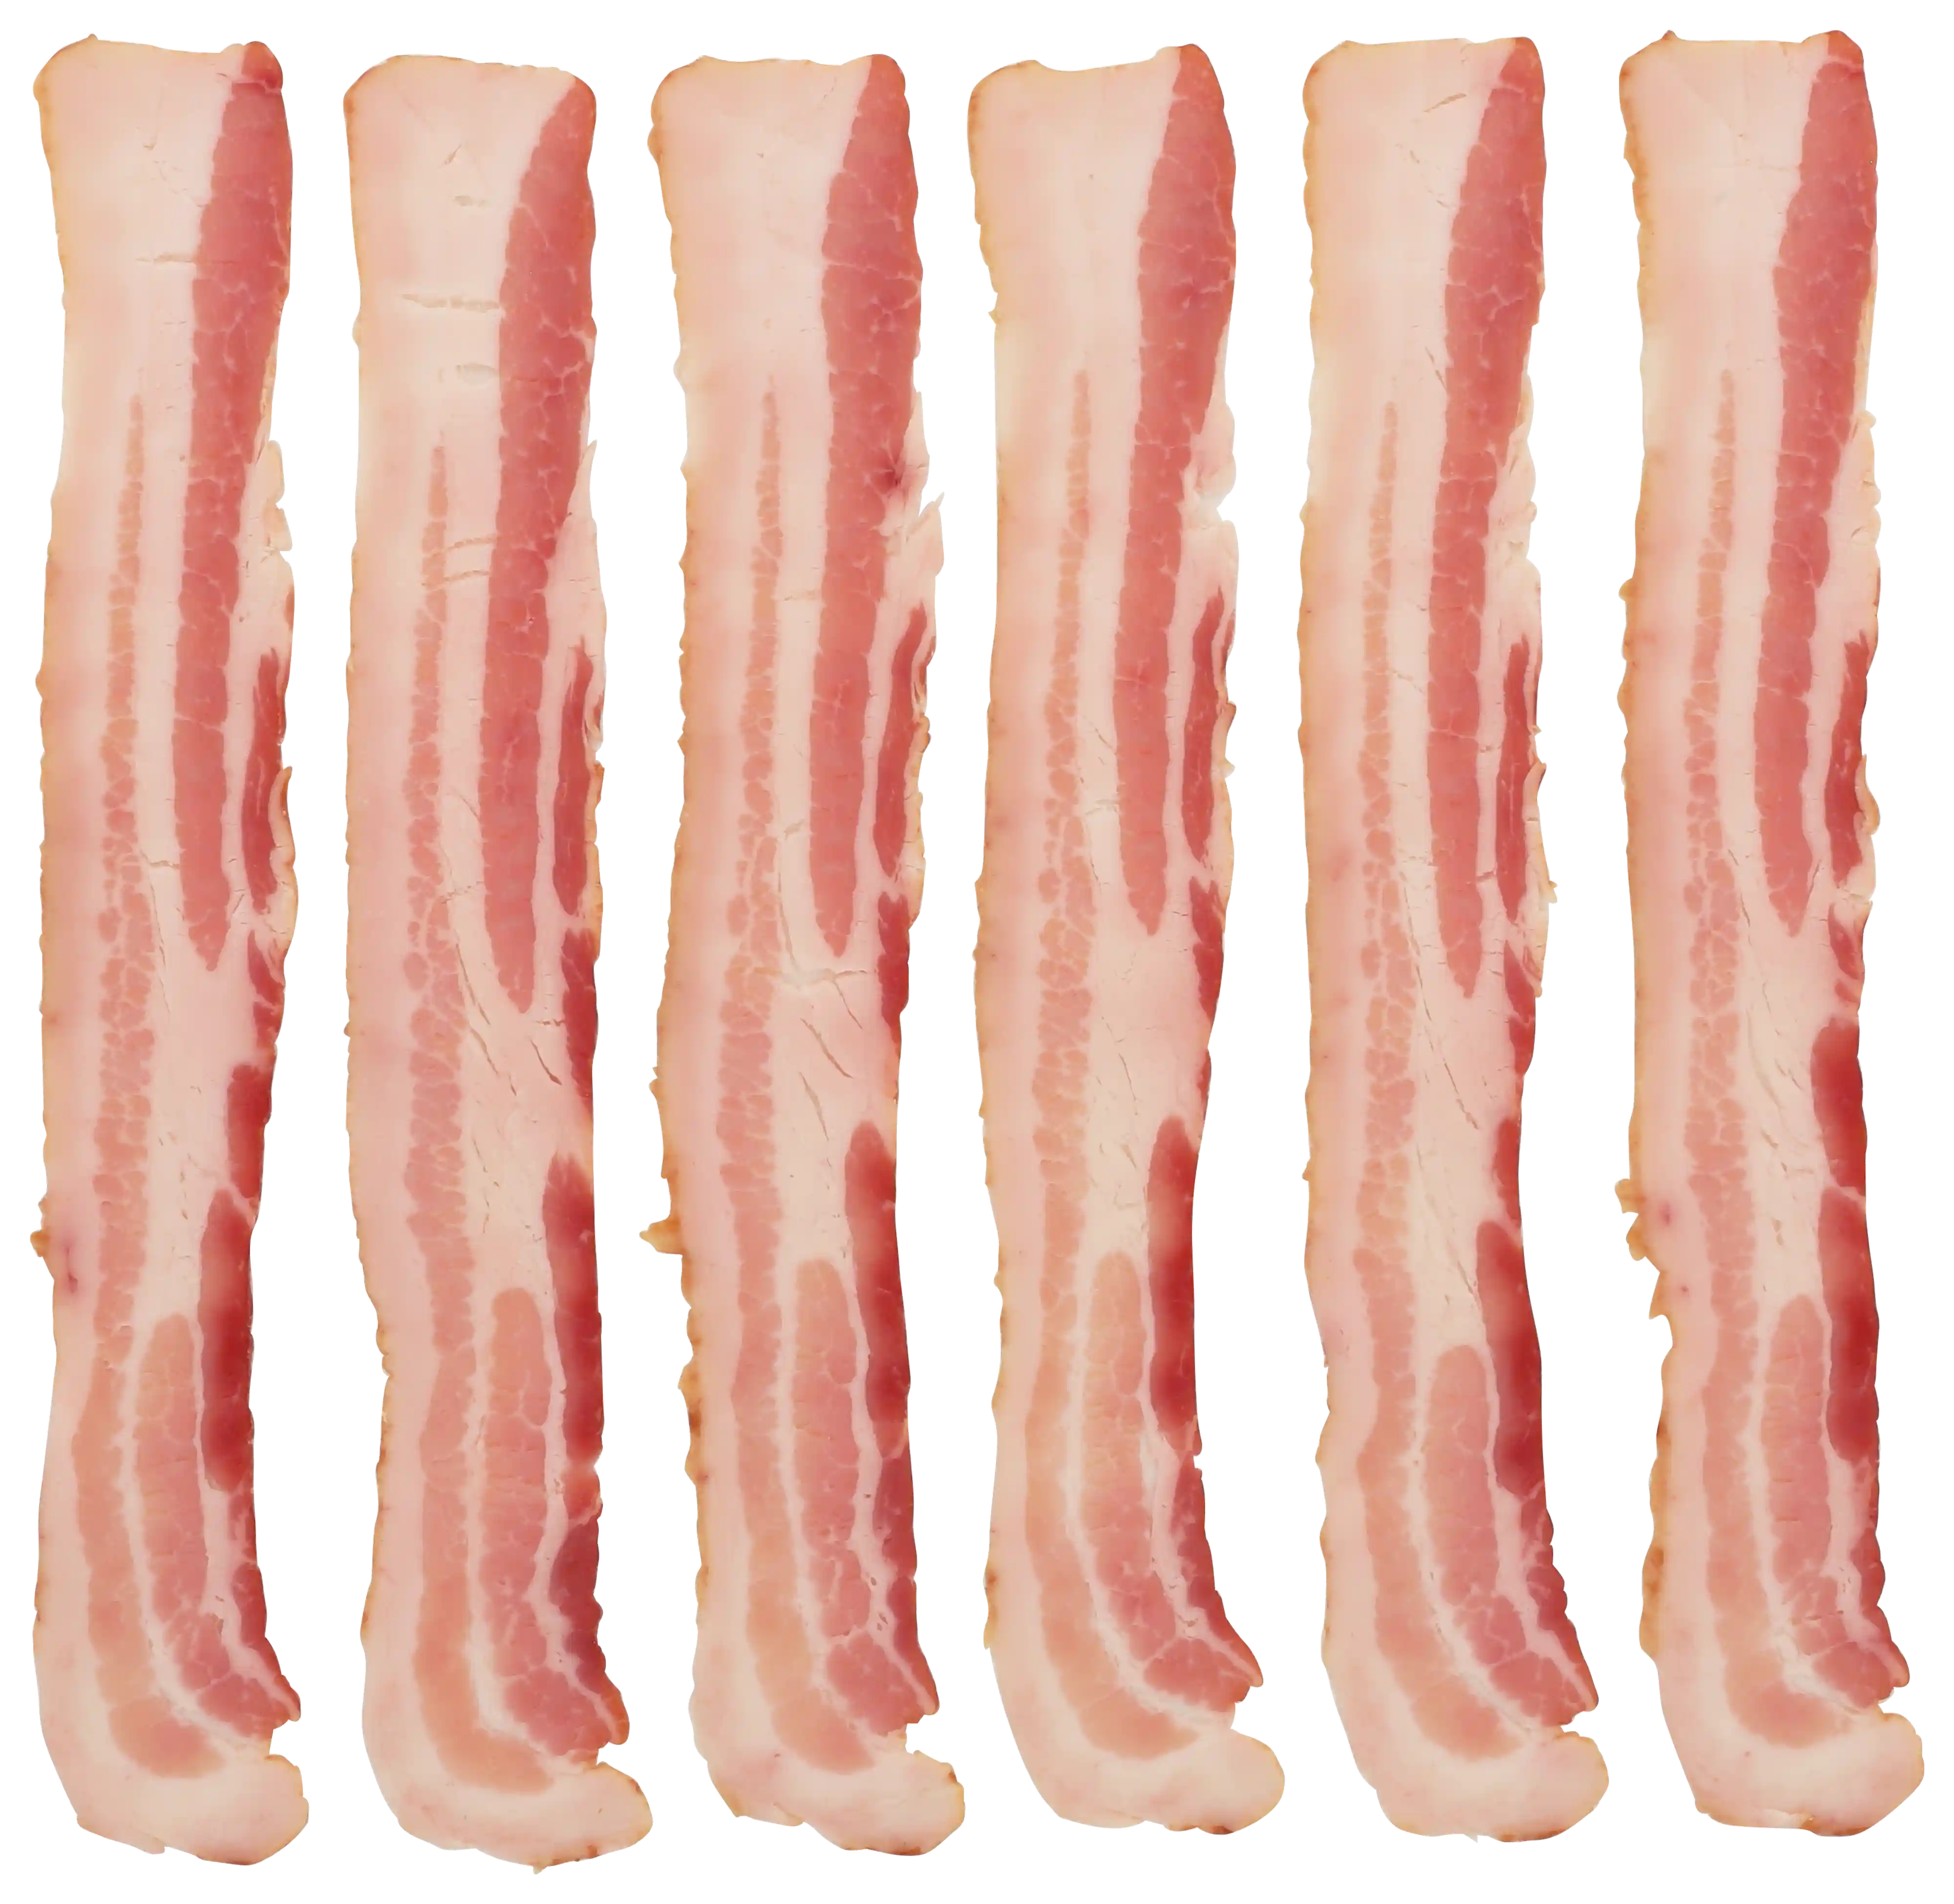 Wright® Brand Naturally Applewood Smoked Regular Sliced Bacon, Flat-Pack®, 15 Lbs, 14-18 Slices per Pound, Gas Flushed_image_21